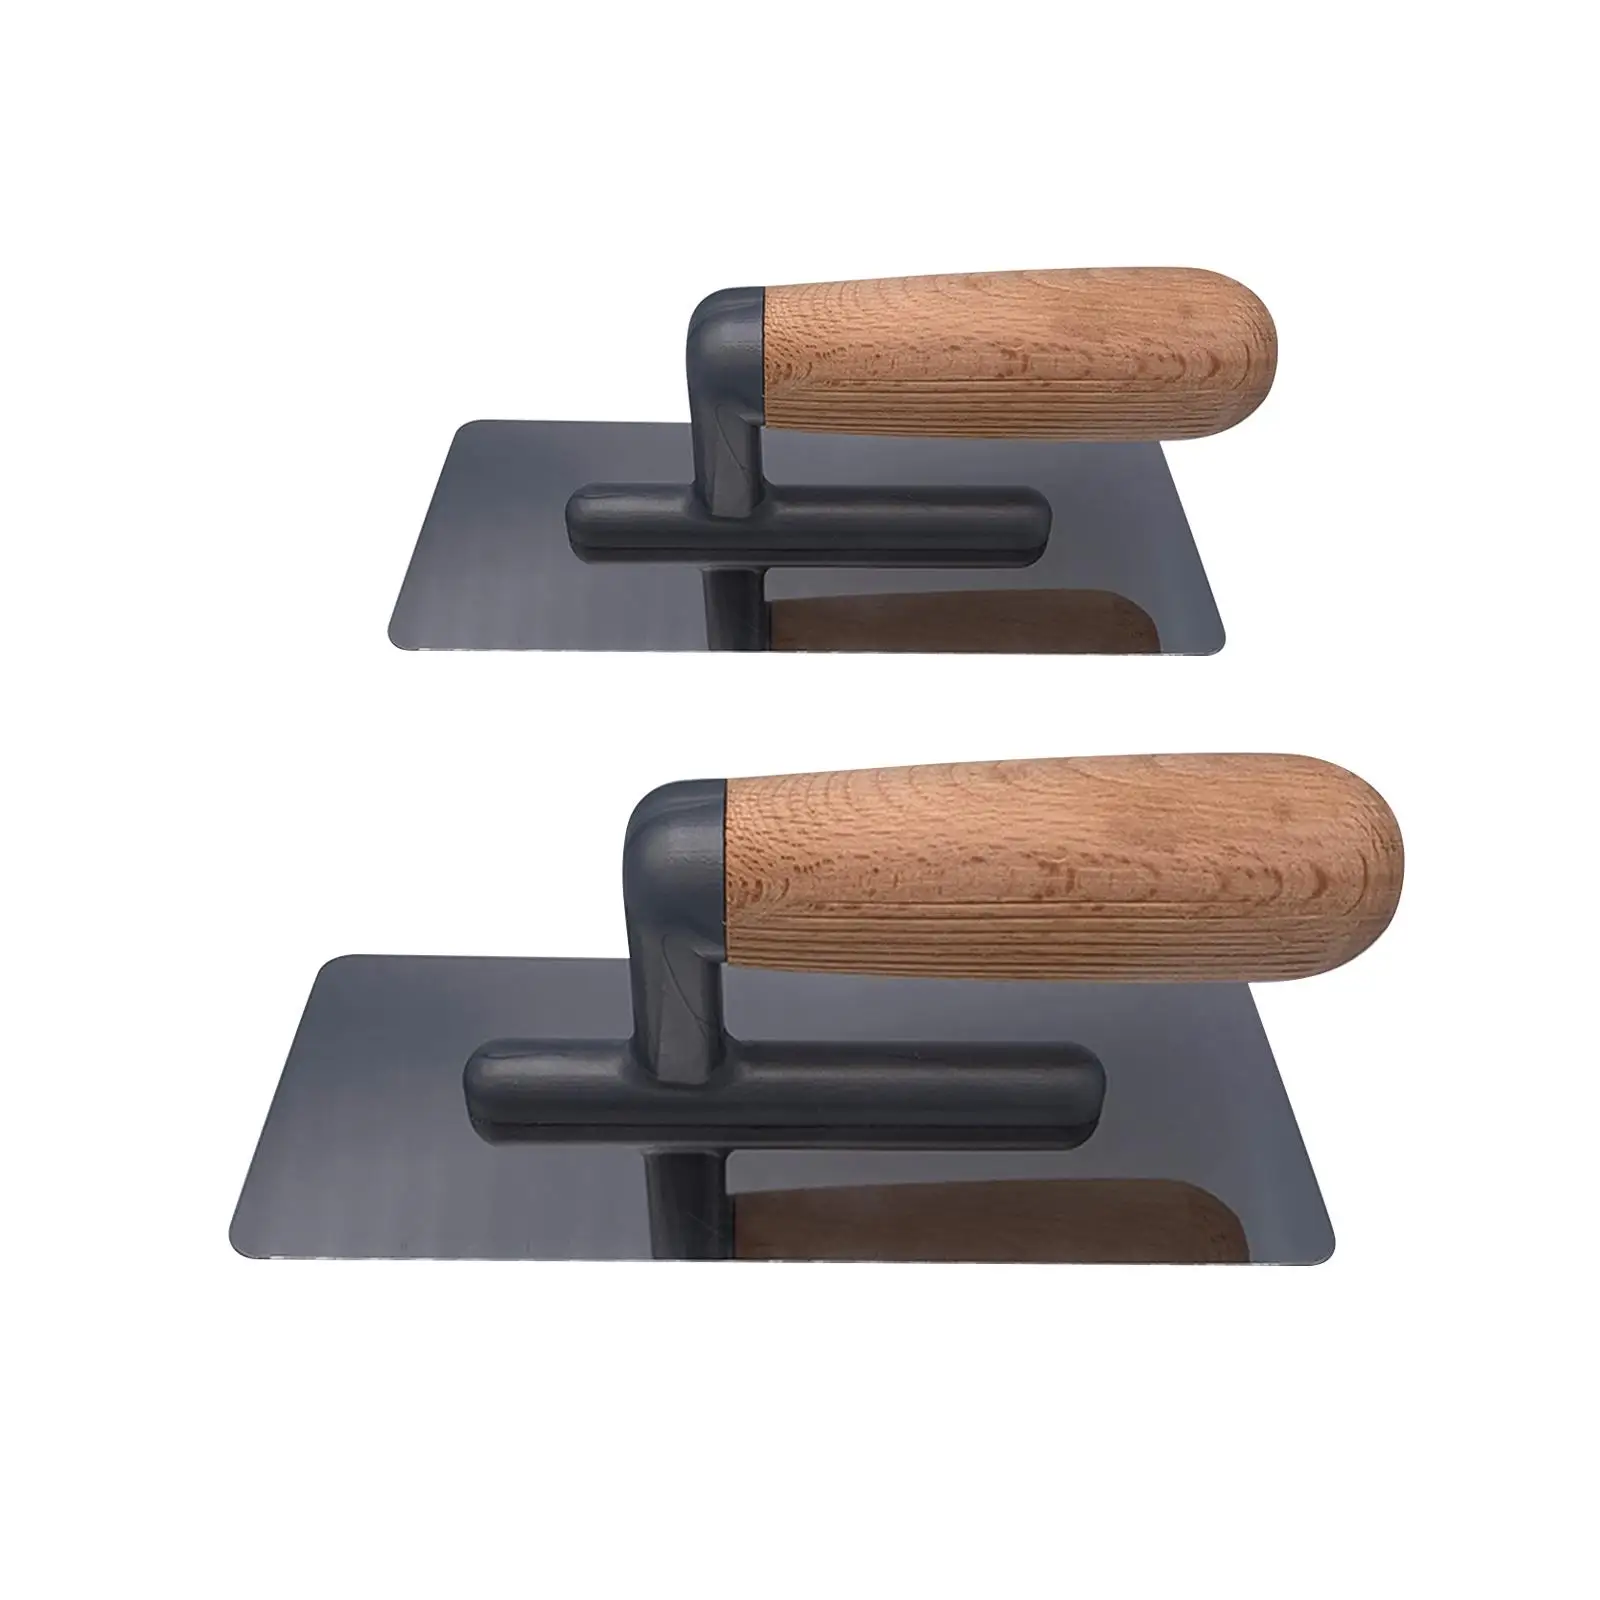 Finishing Trowel Wood Handle Normal Polish Stainless Steel Plaster Finishing Trowel for Sheetrock Cement Concrete Craftsman